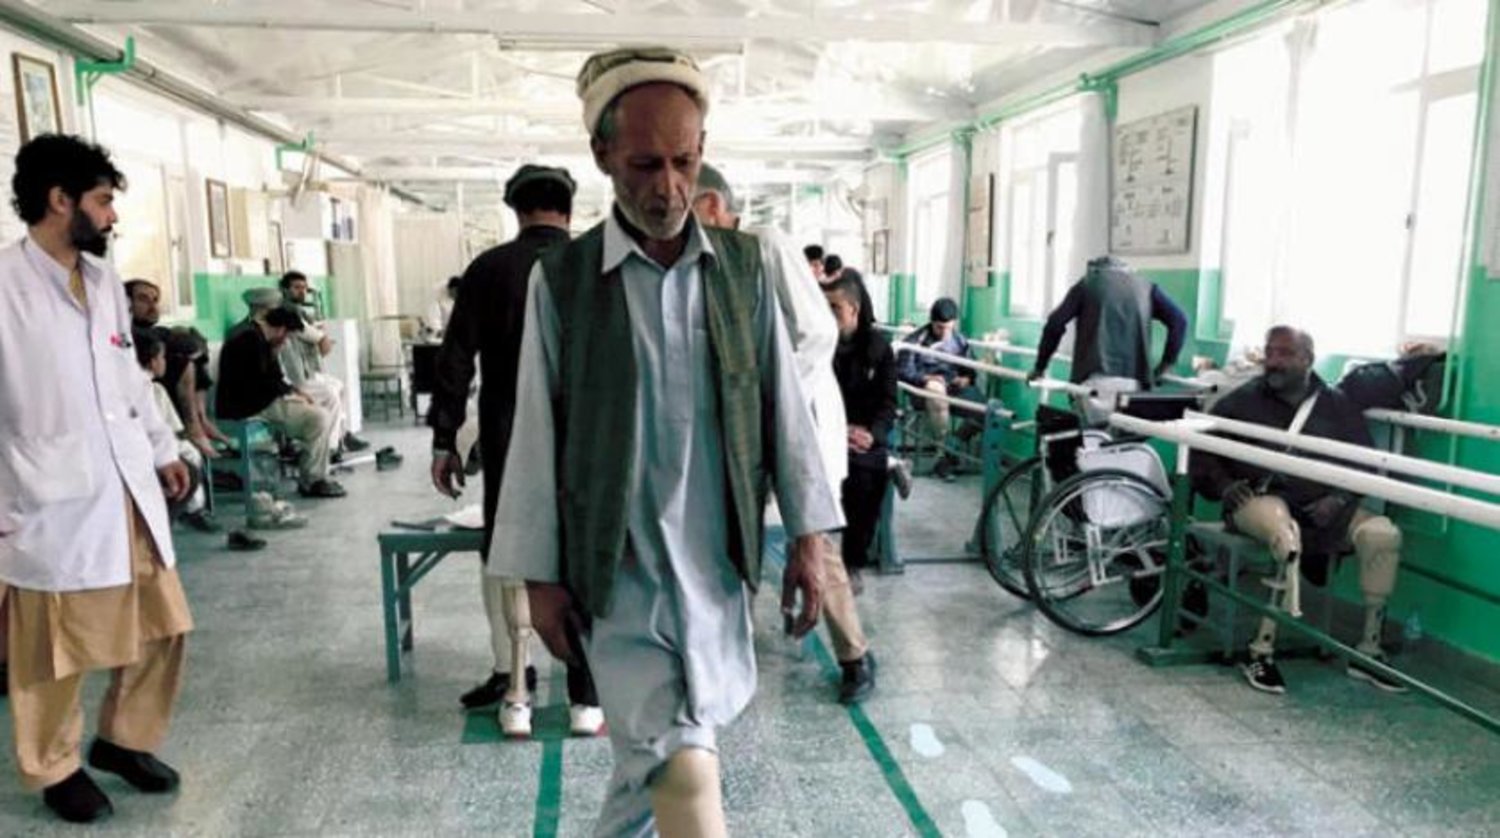 An Afghan man who lost his leg to a landmine tries out his new prosthetic leg inside a Red Cross orthopedic center in Kabul. (Antonio Olivo/The Washington Post)